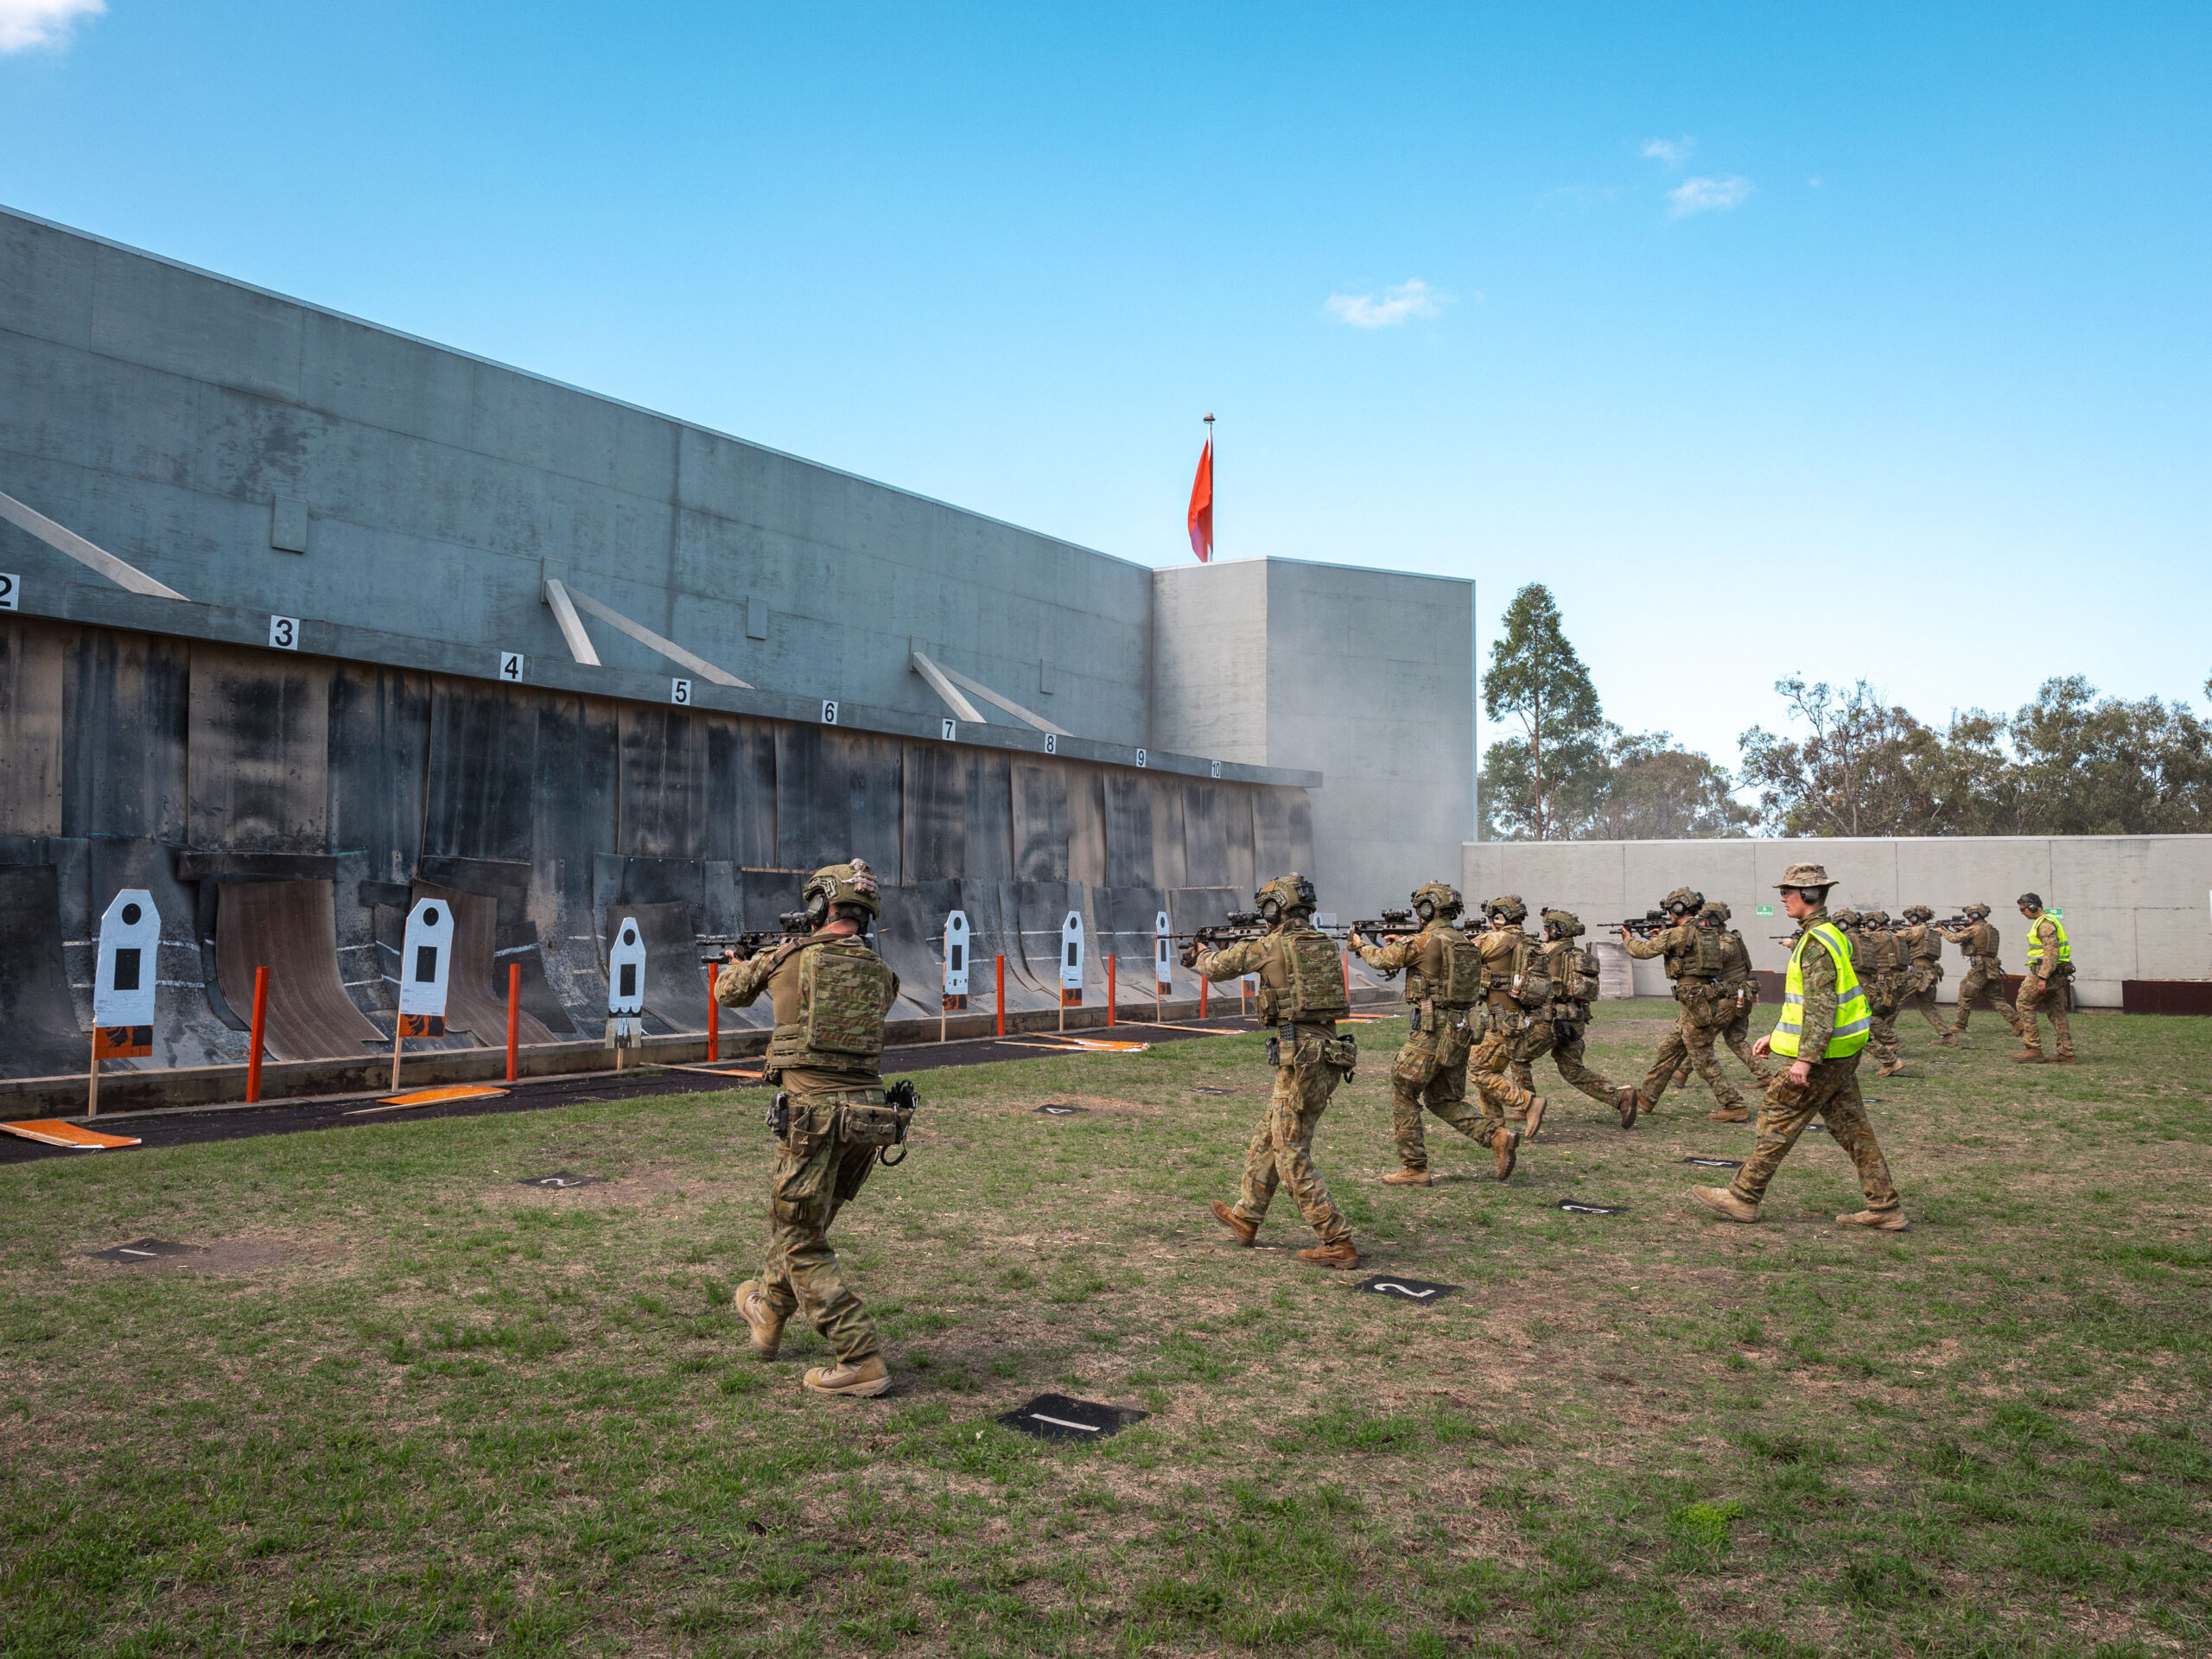 Riflemen from the 6th and 8th/9th Battalions, The Royal Australian Regiment engage targets on the move during the enhance combat shooting lesson a part of the Urban Operation Use Course at Gallipoli Barracks, Brisbane. *** Local Caption *** Members from 8th/9th and 6th Battalions, The Royal Australian Regiment took part in an Urban Operations User Course in South-East Queensland in November and December. The course’s culminating activity was a platoon assault on an urban operations training facility, featuring a live breach. The end state of future courses will be a live fire validation at a live fire urban range. This training demonstrates Army’s commitment to enhancing the foundation warfighting capability.